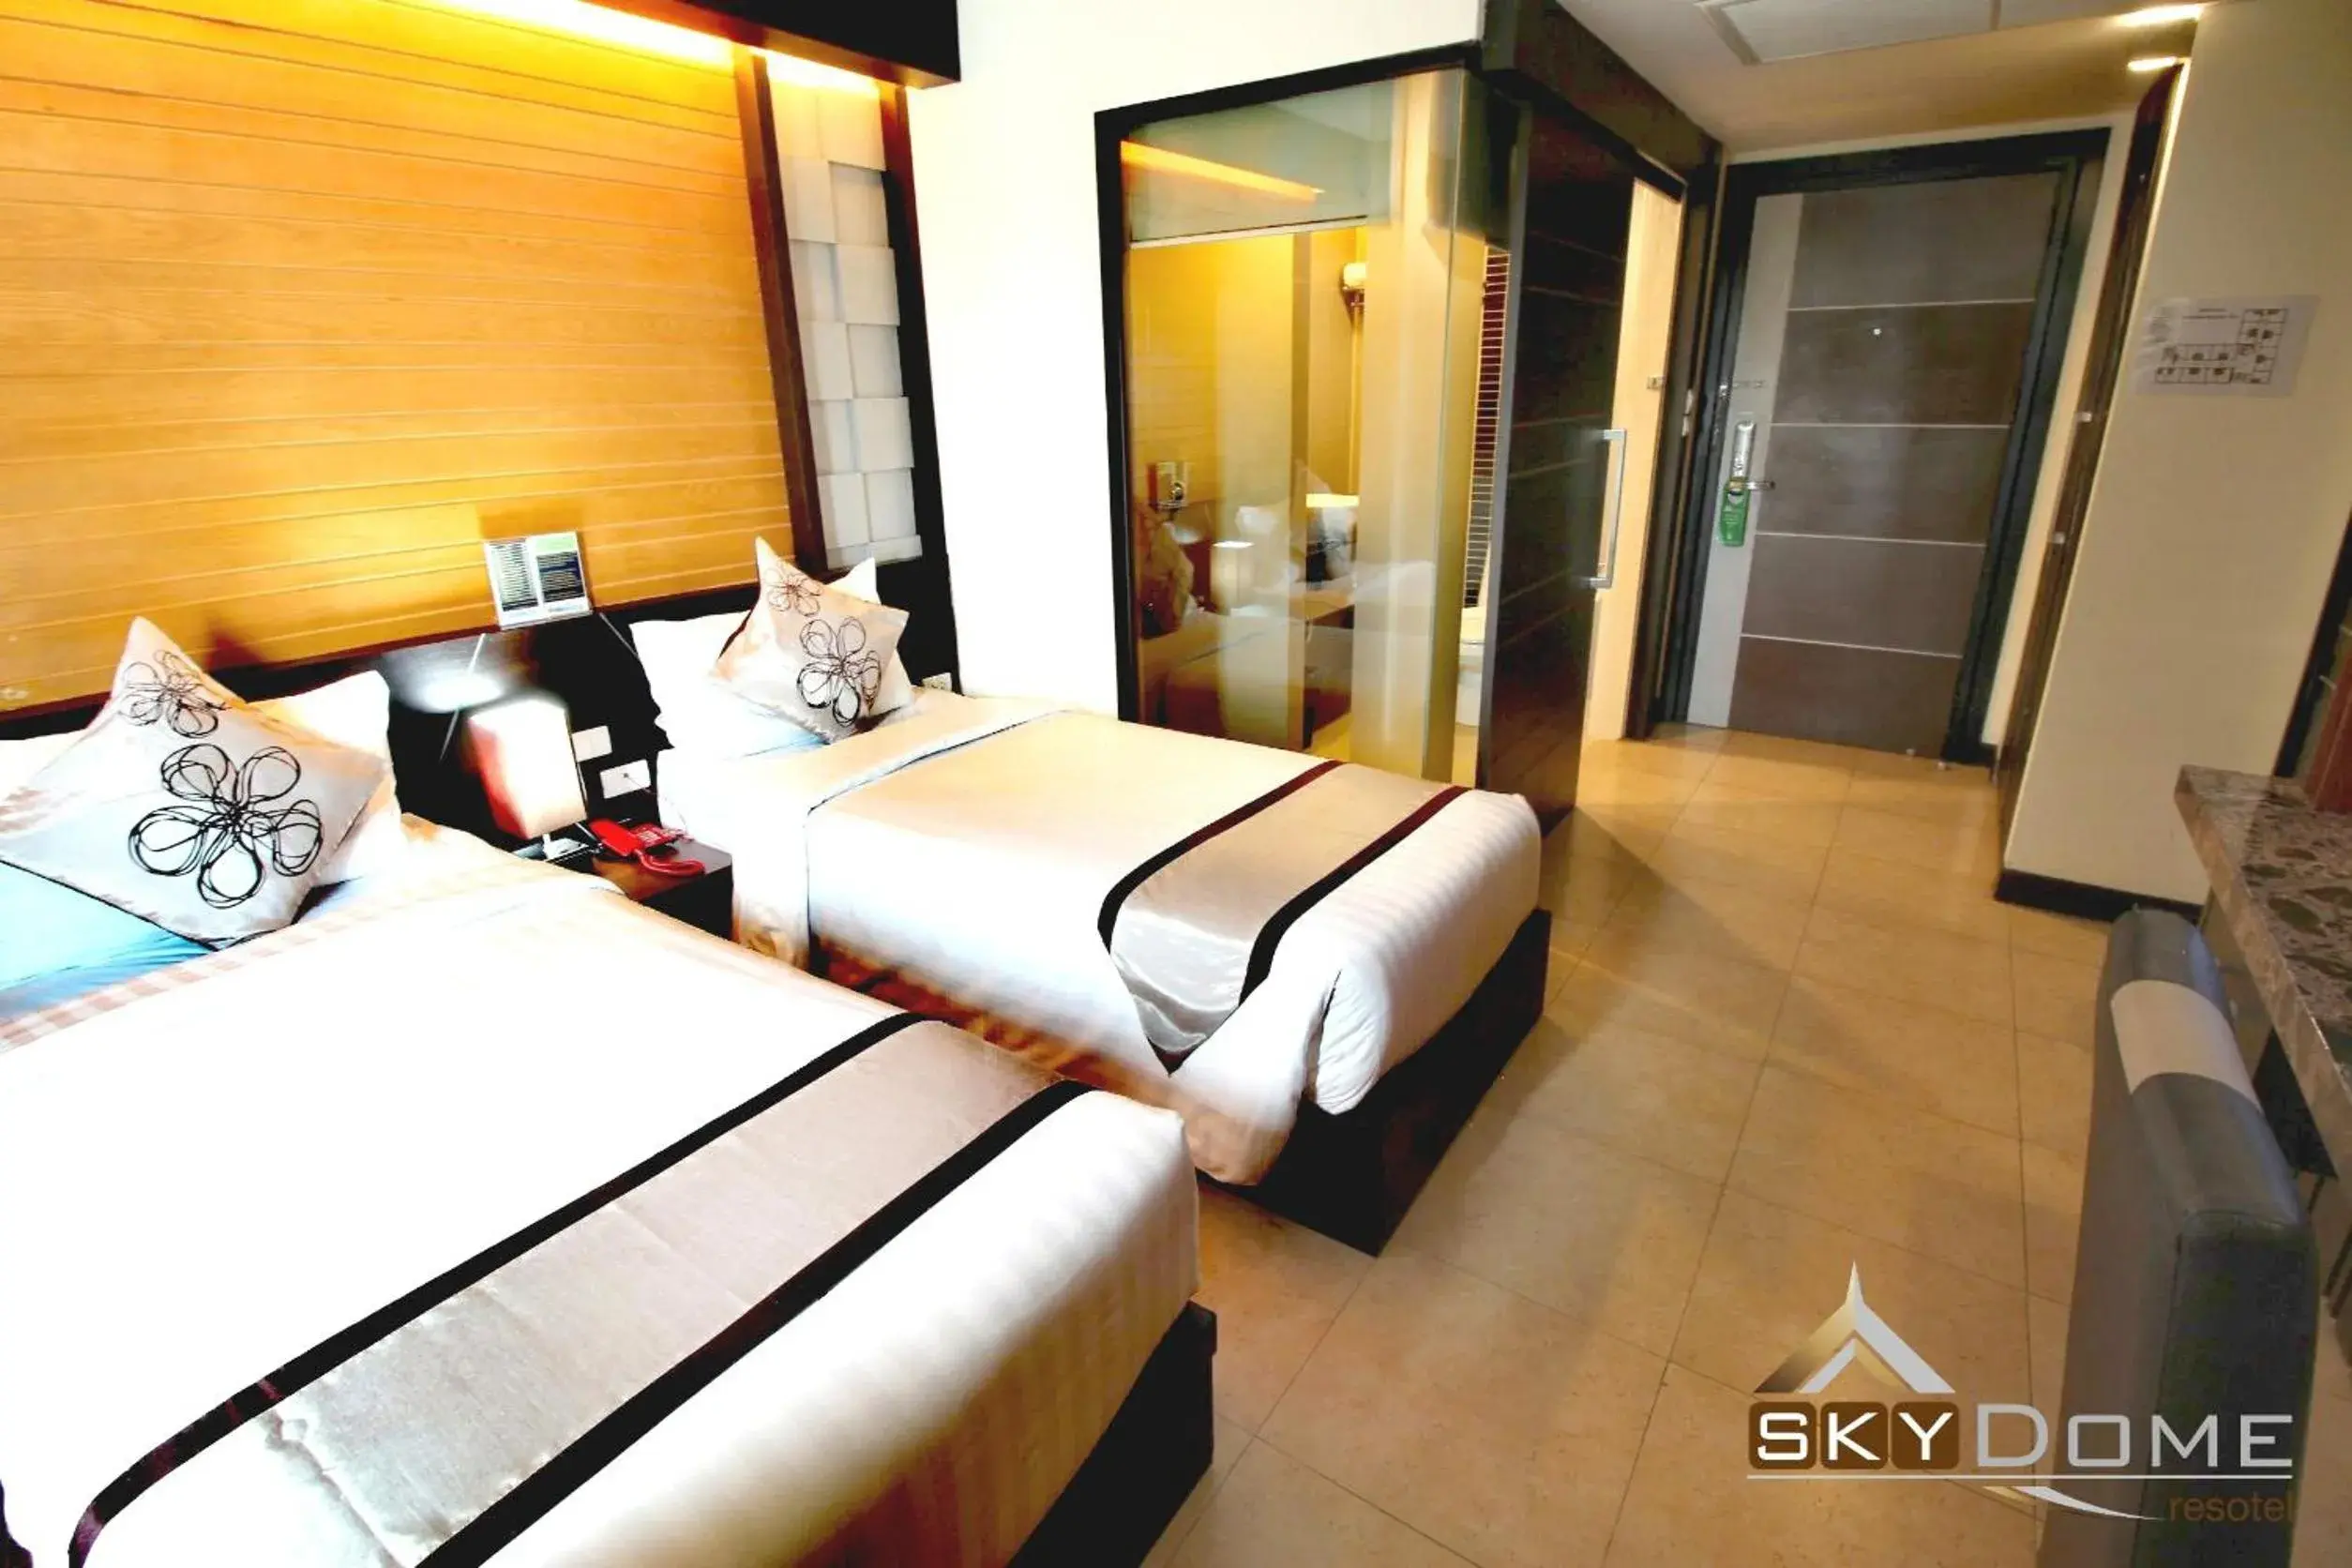 Property building, Bed in Sky Dome Resotel